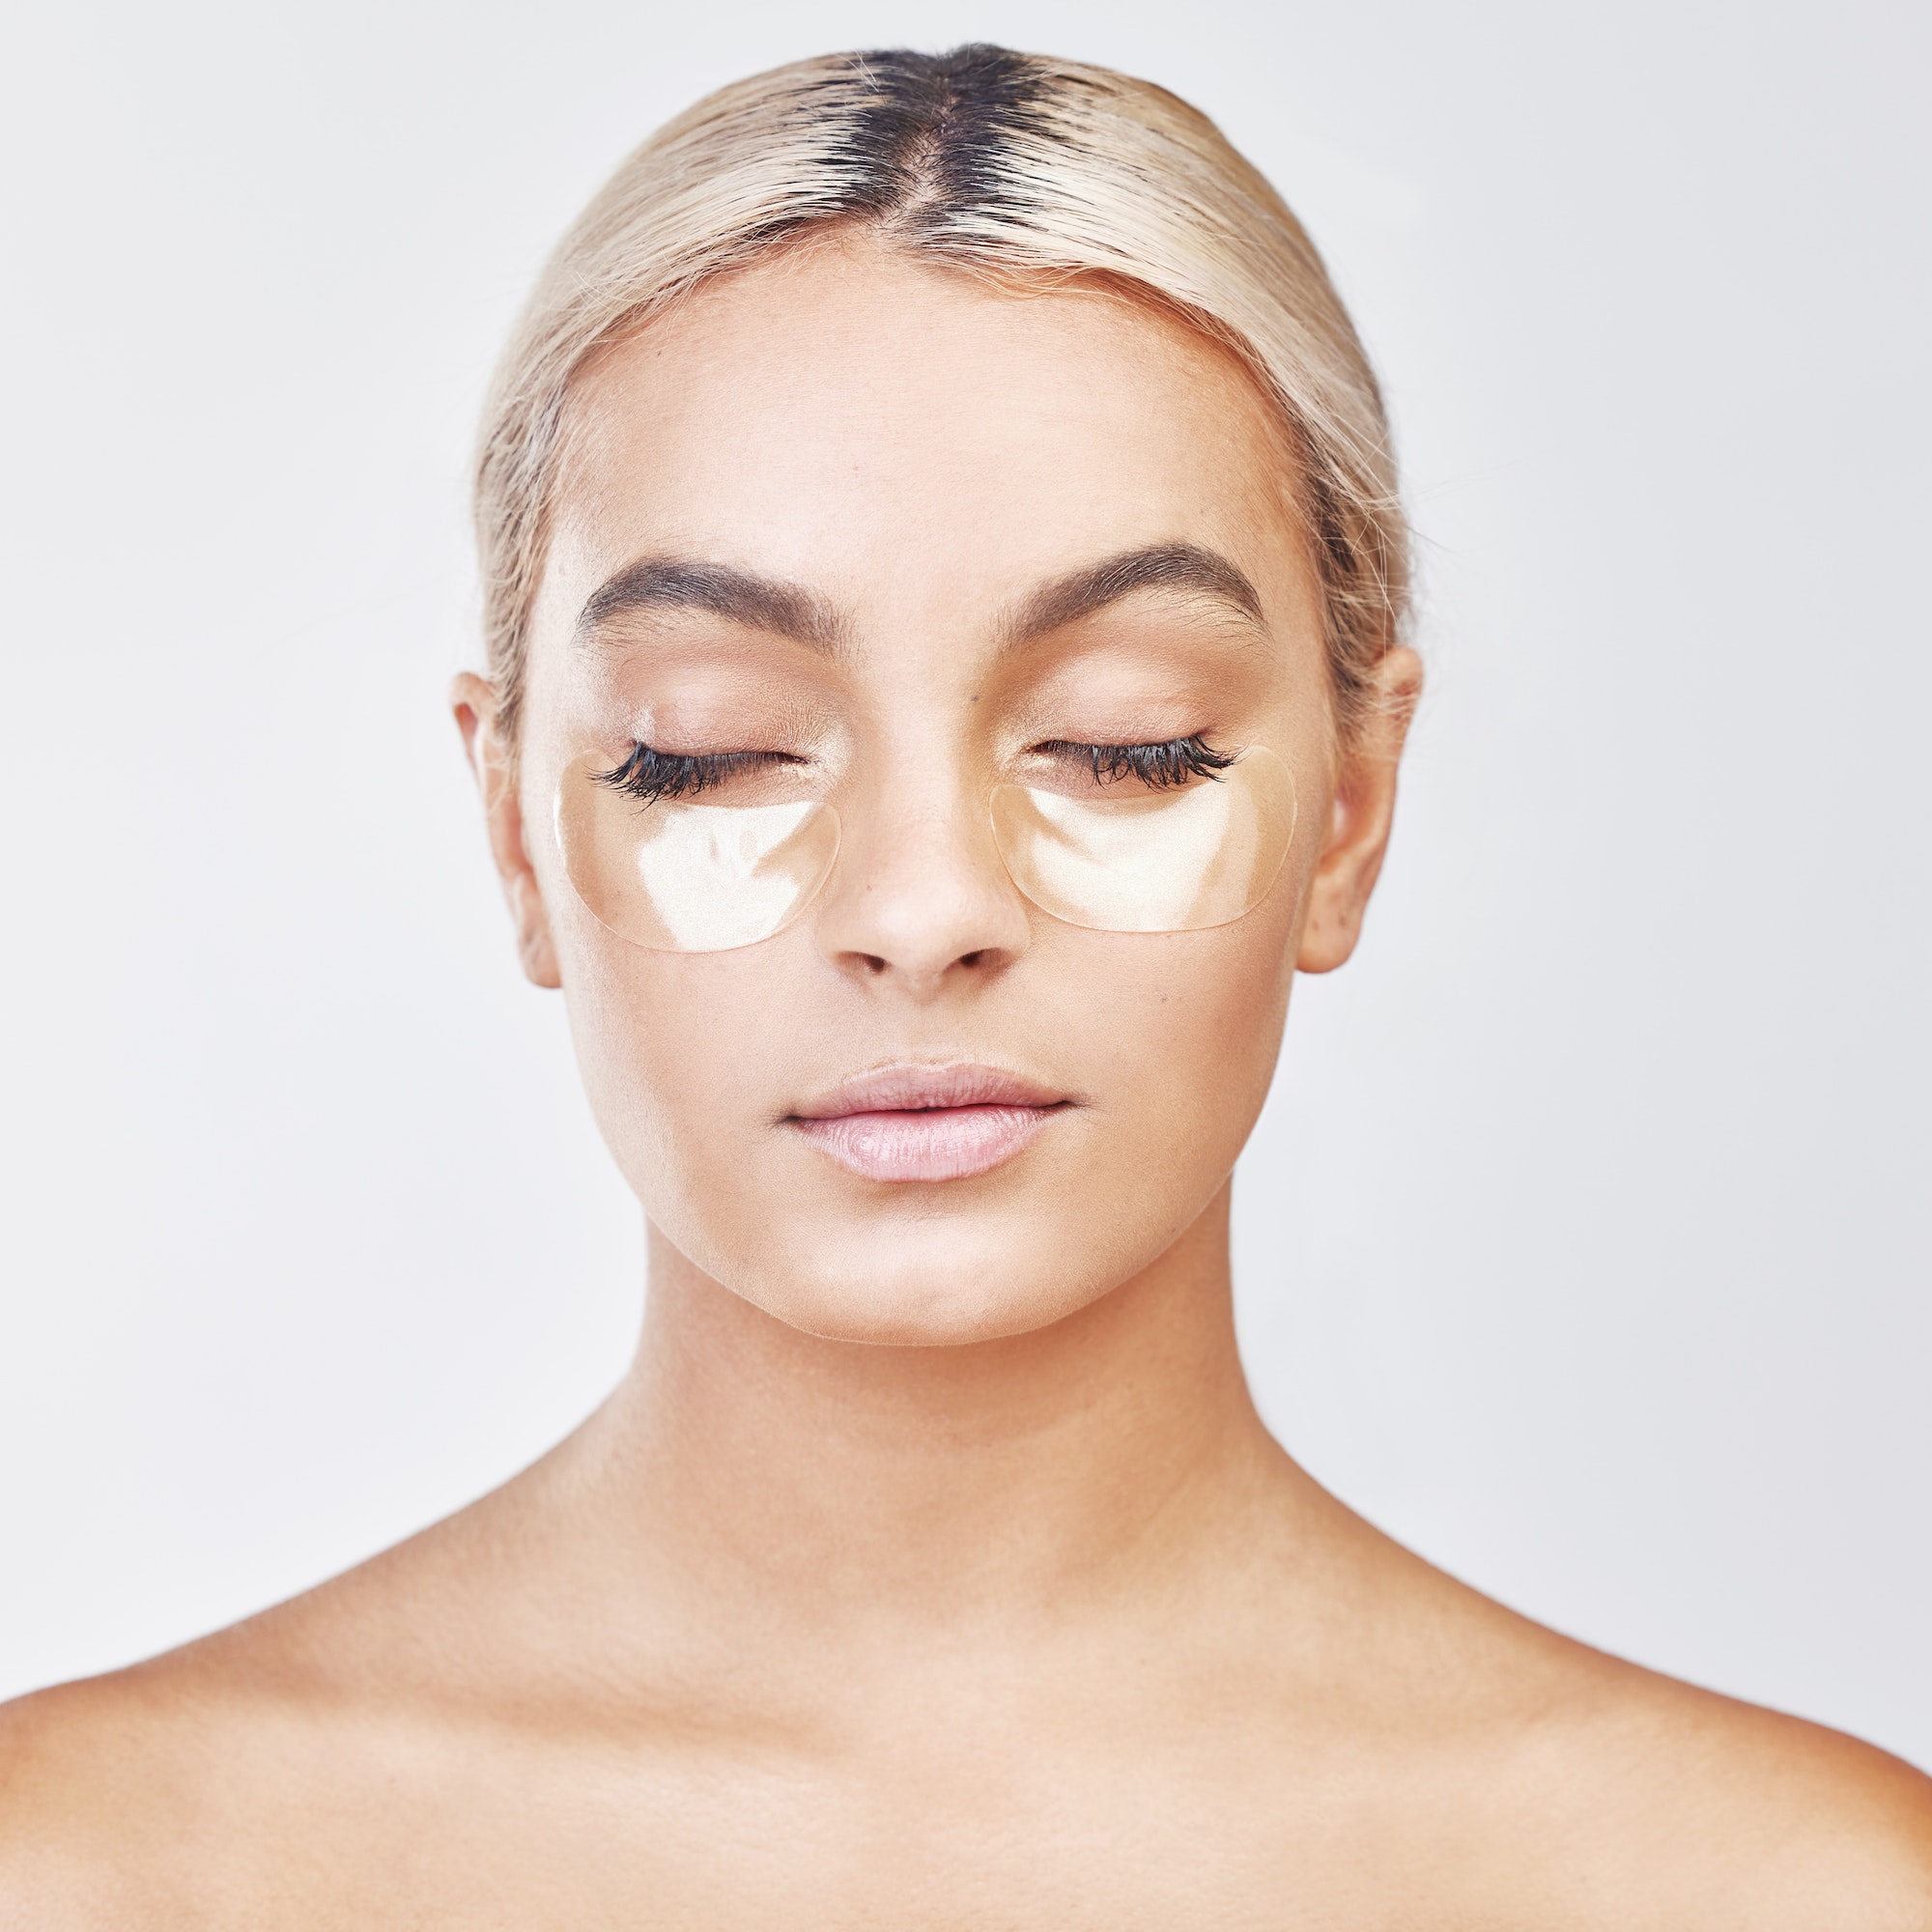 Studio shot of a beautiful young woman wearing an under-eye beauty patch against a grey background